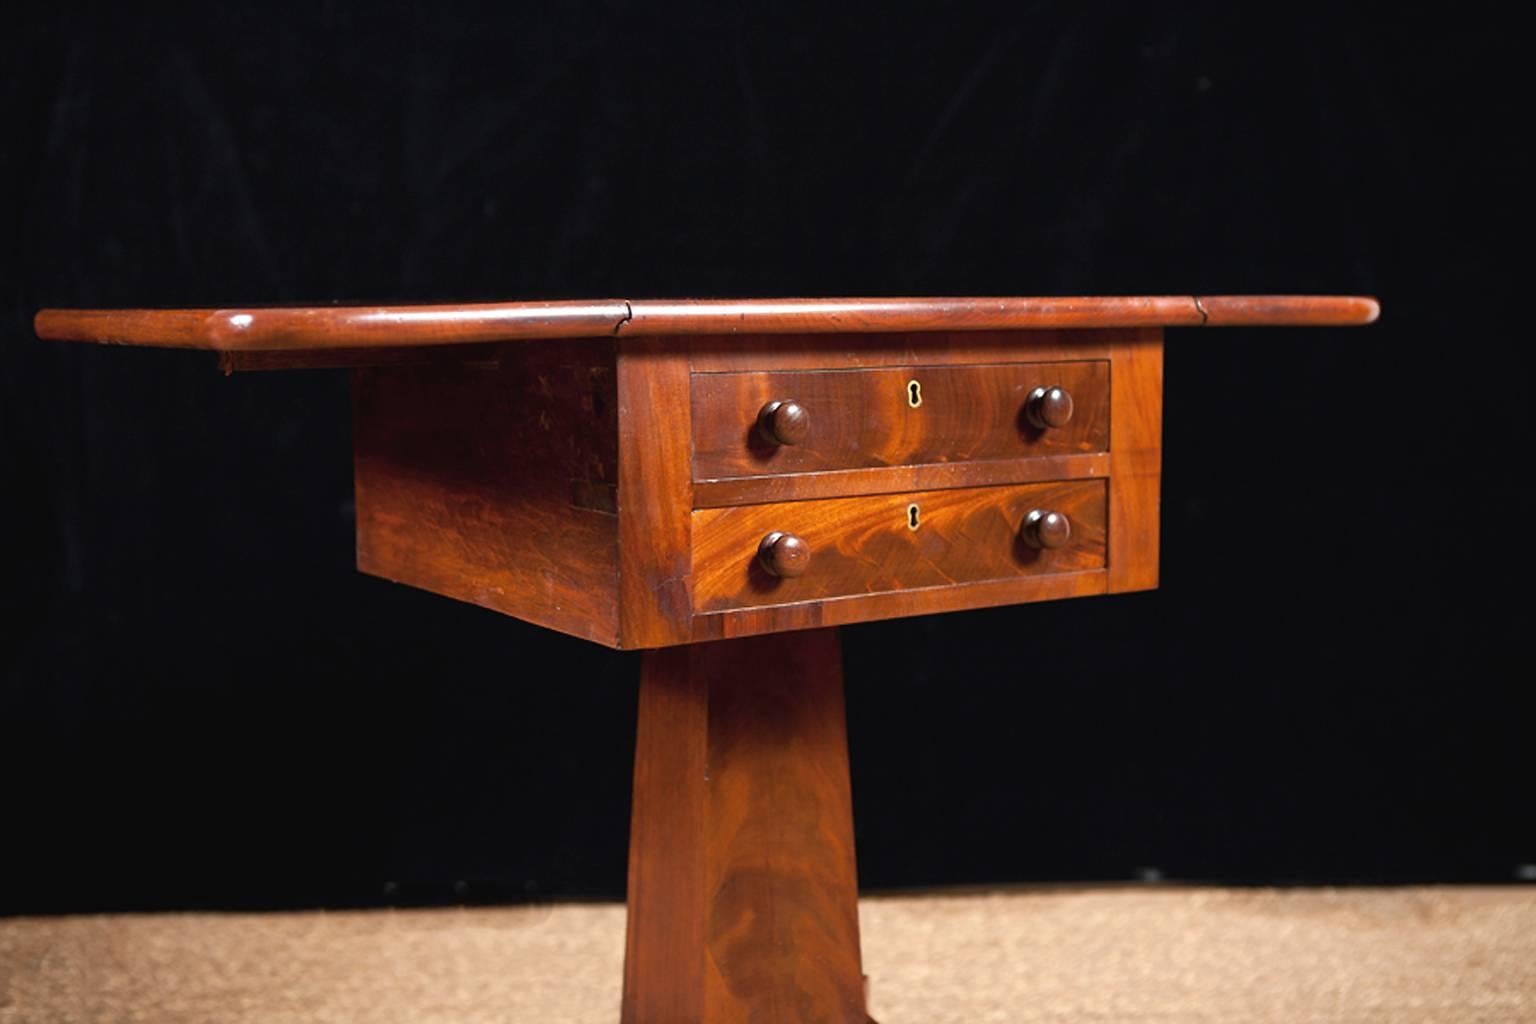 Polished Antique American Empire Side Table with Pedestal Base in Mahogany, circa 1840